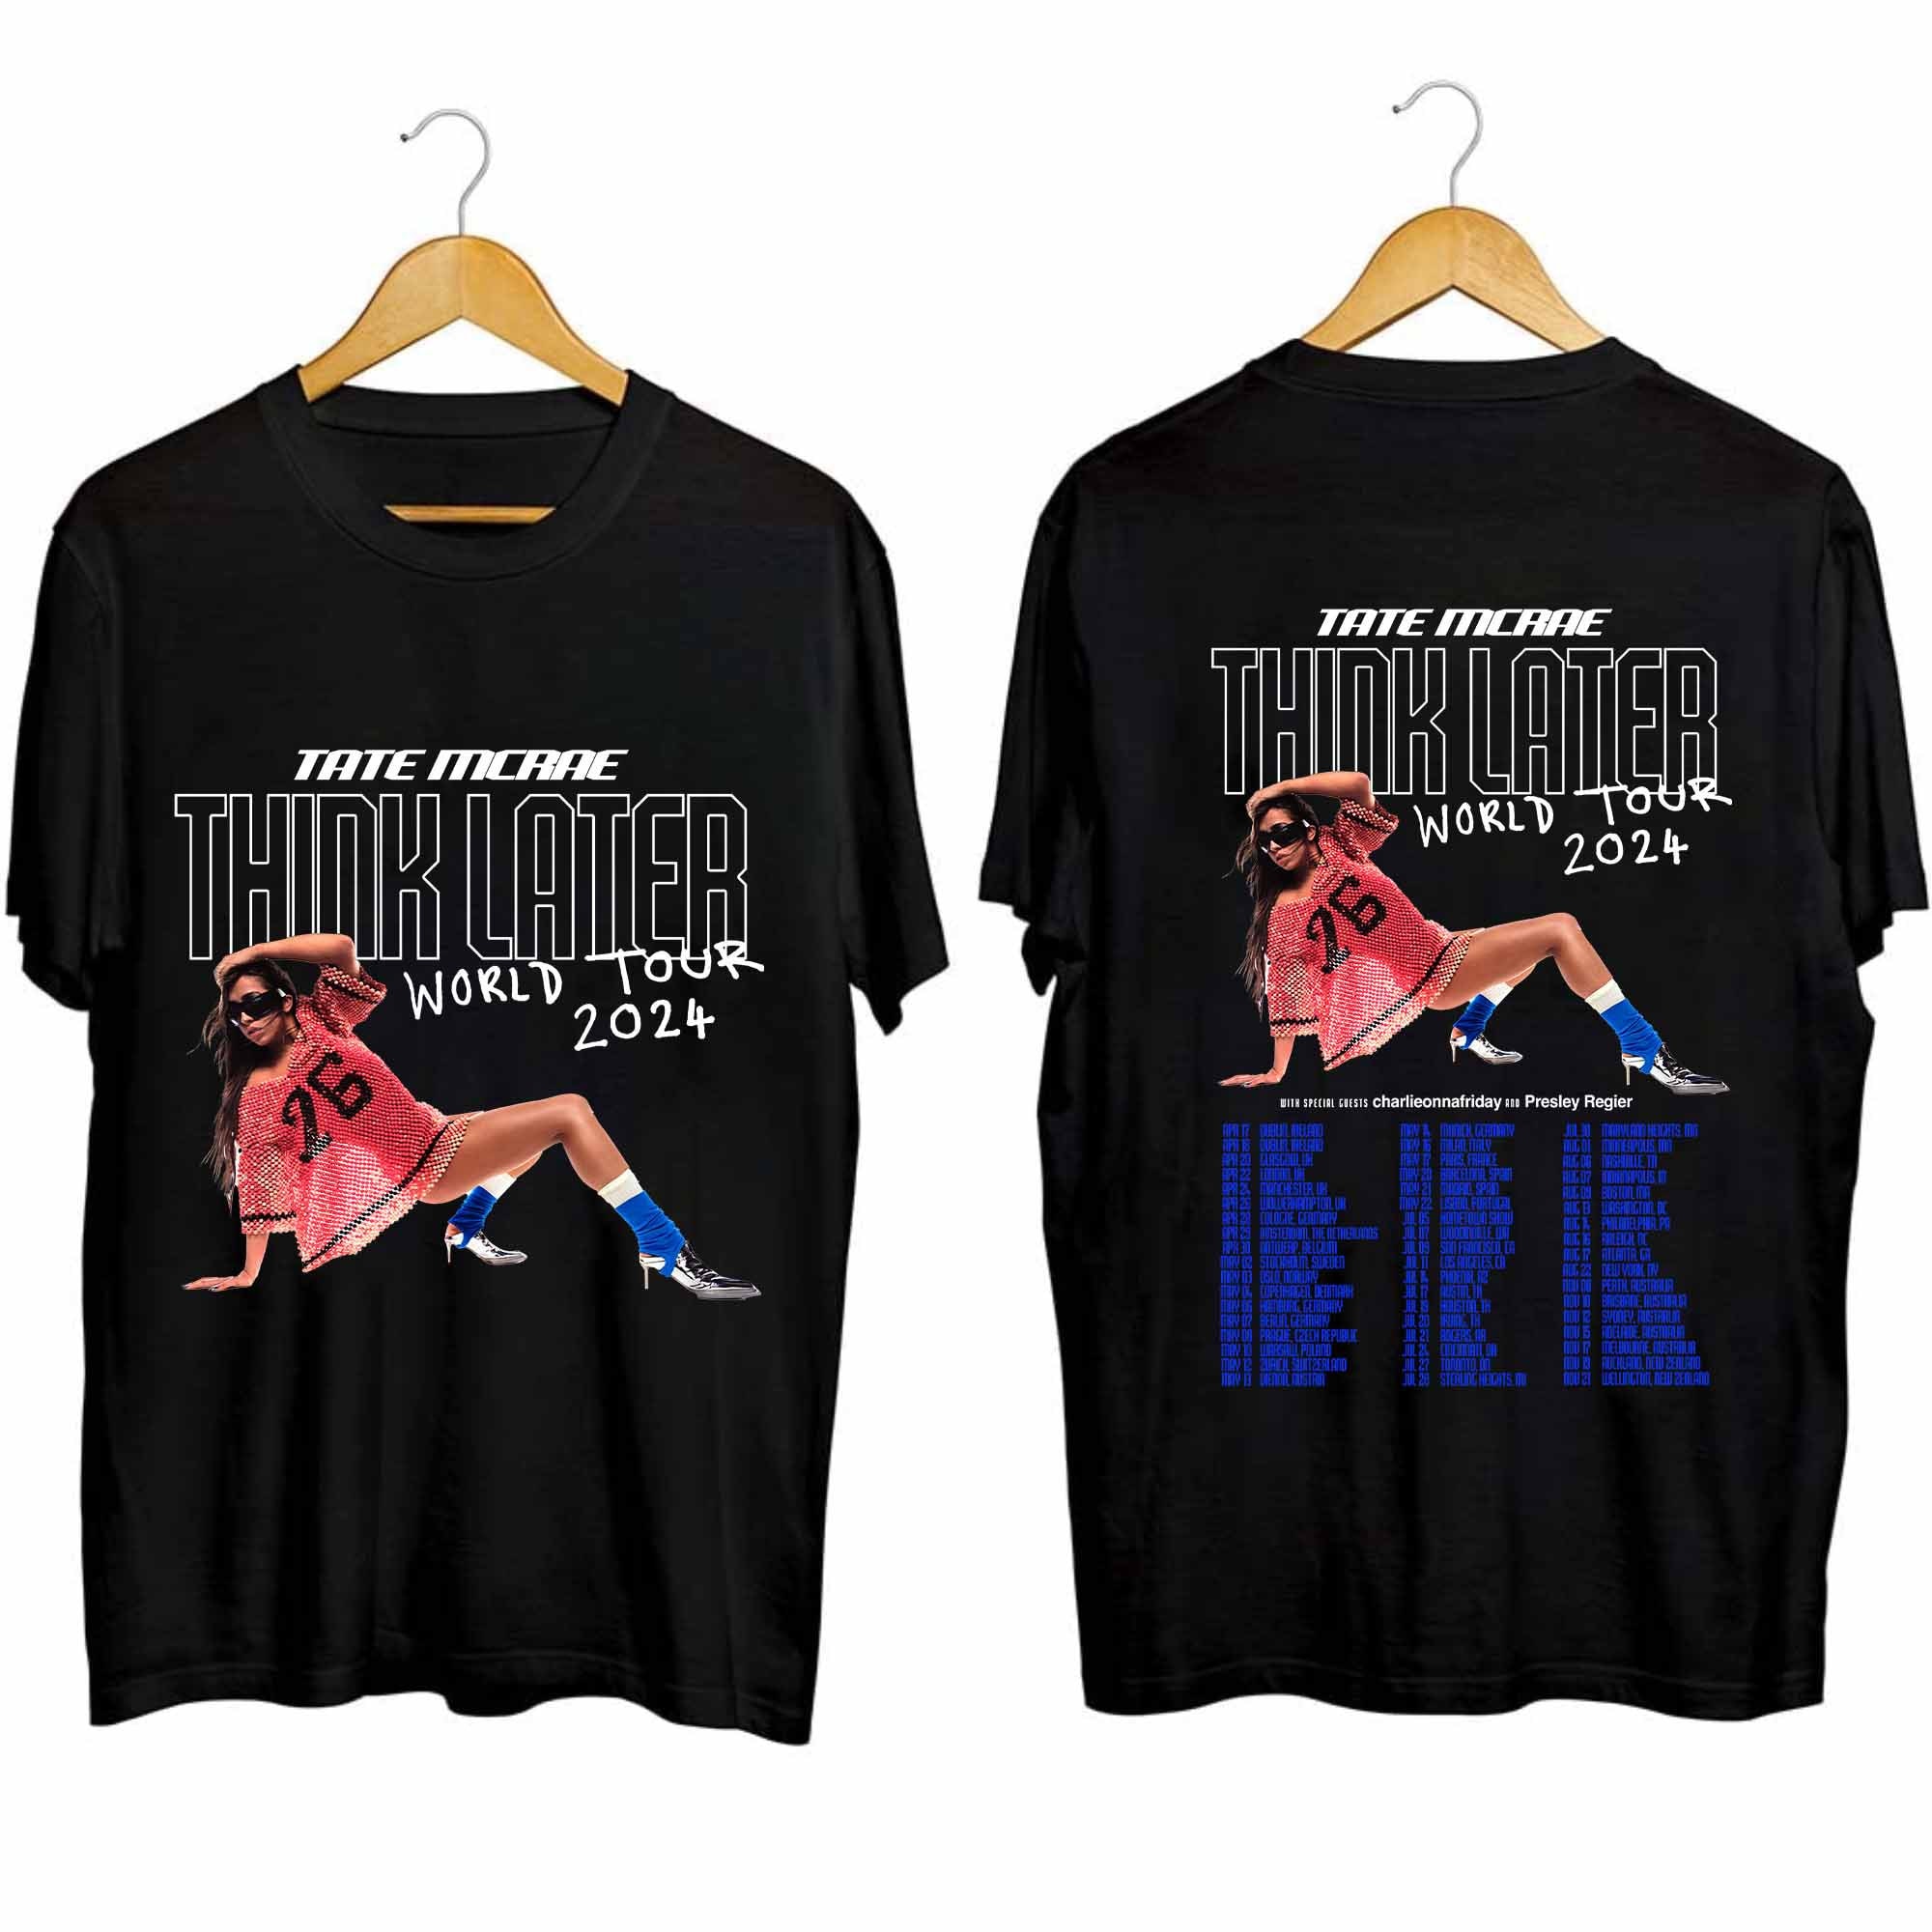 Tate McRae The Think Later World Tour 2024 Tour Shirt, Tate McRae Fan Shirt, Tate McRae 2024 Concert Shirt, The Think Later World Tour Shirt